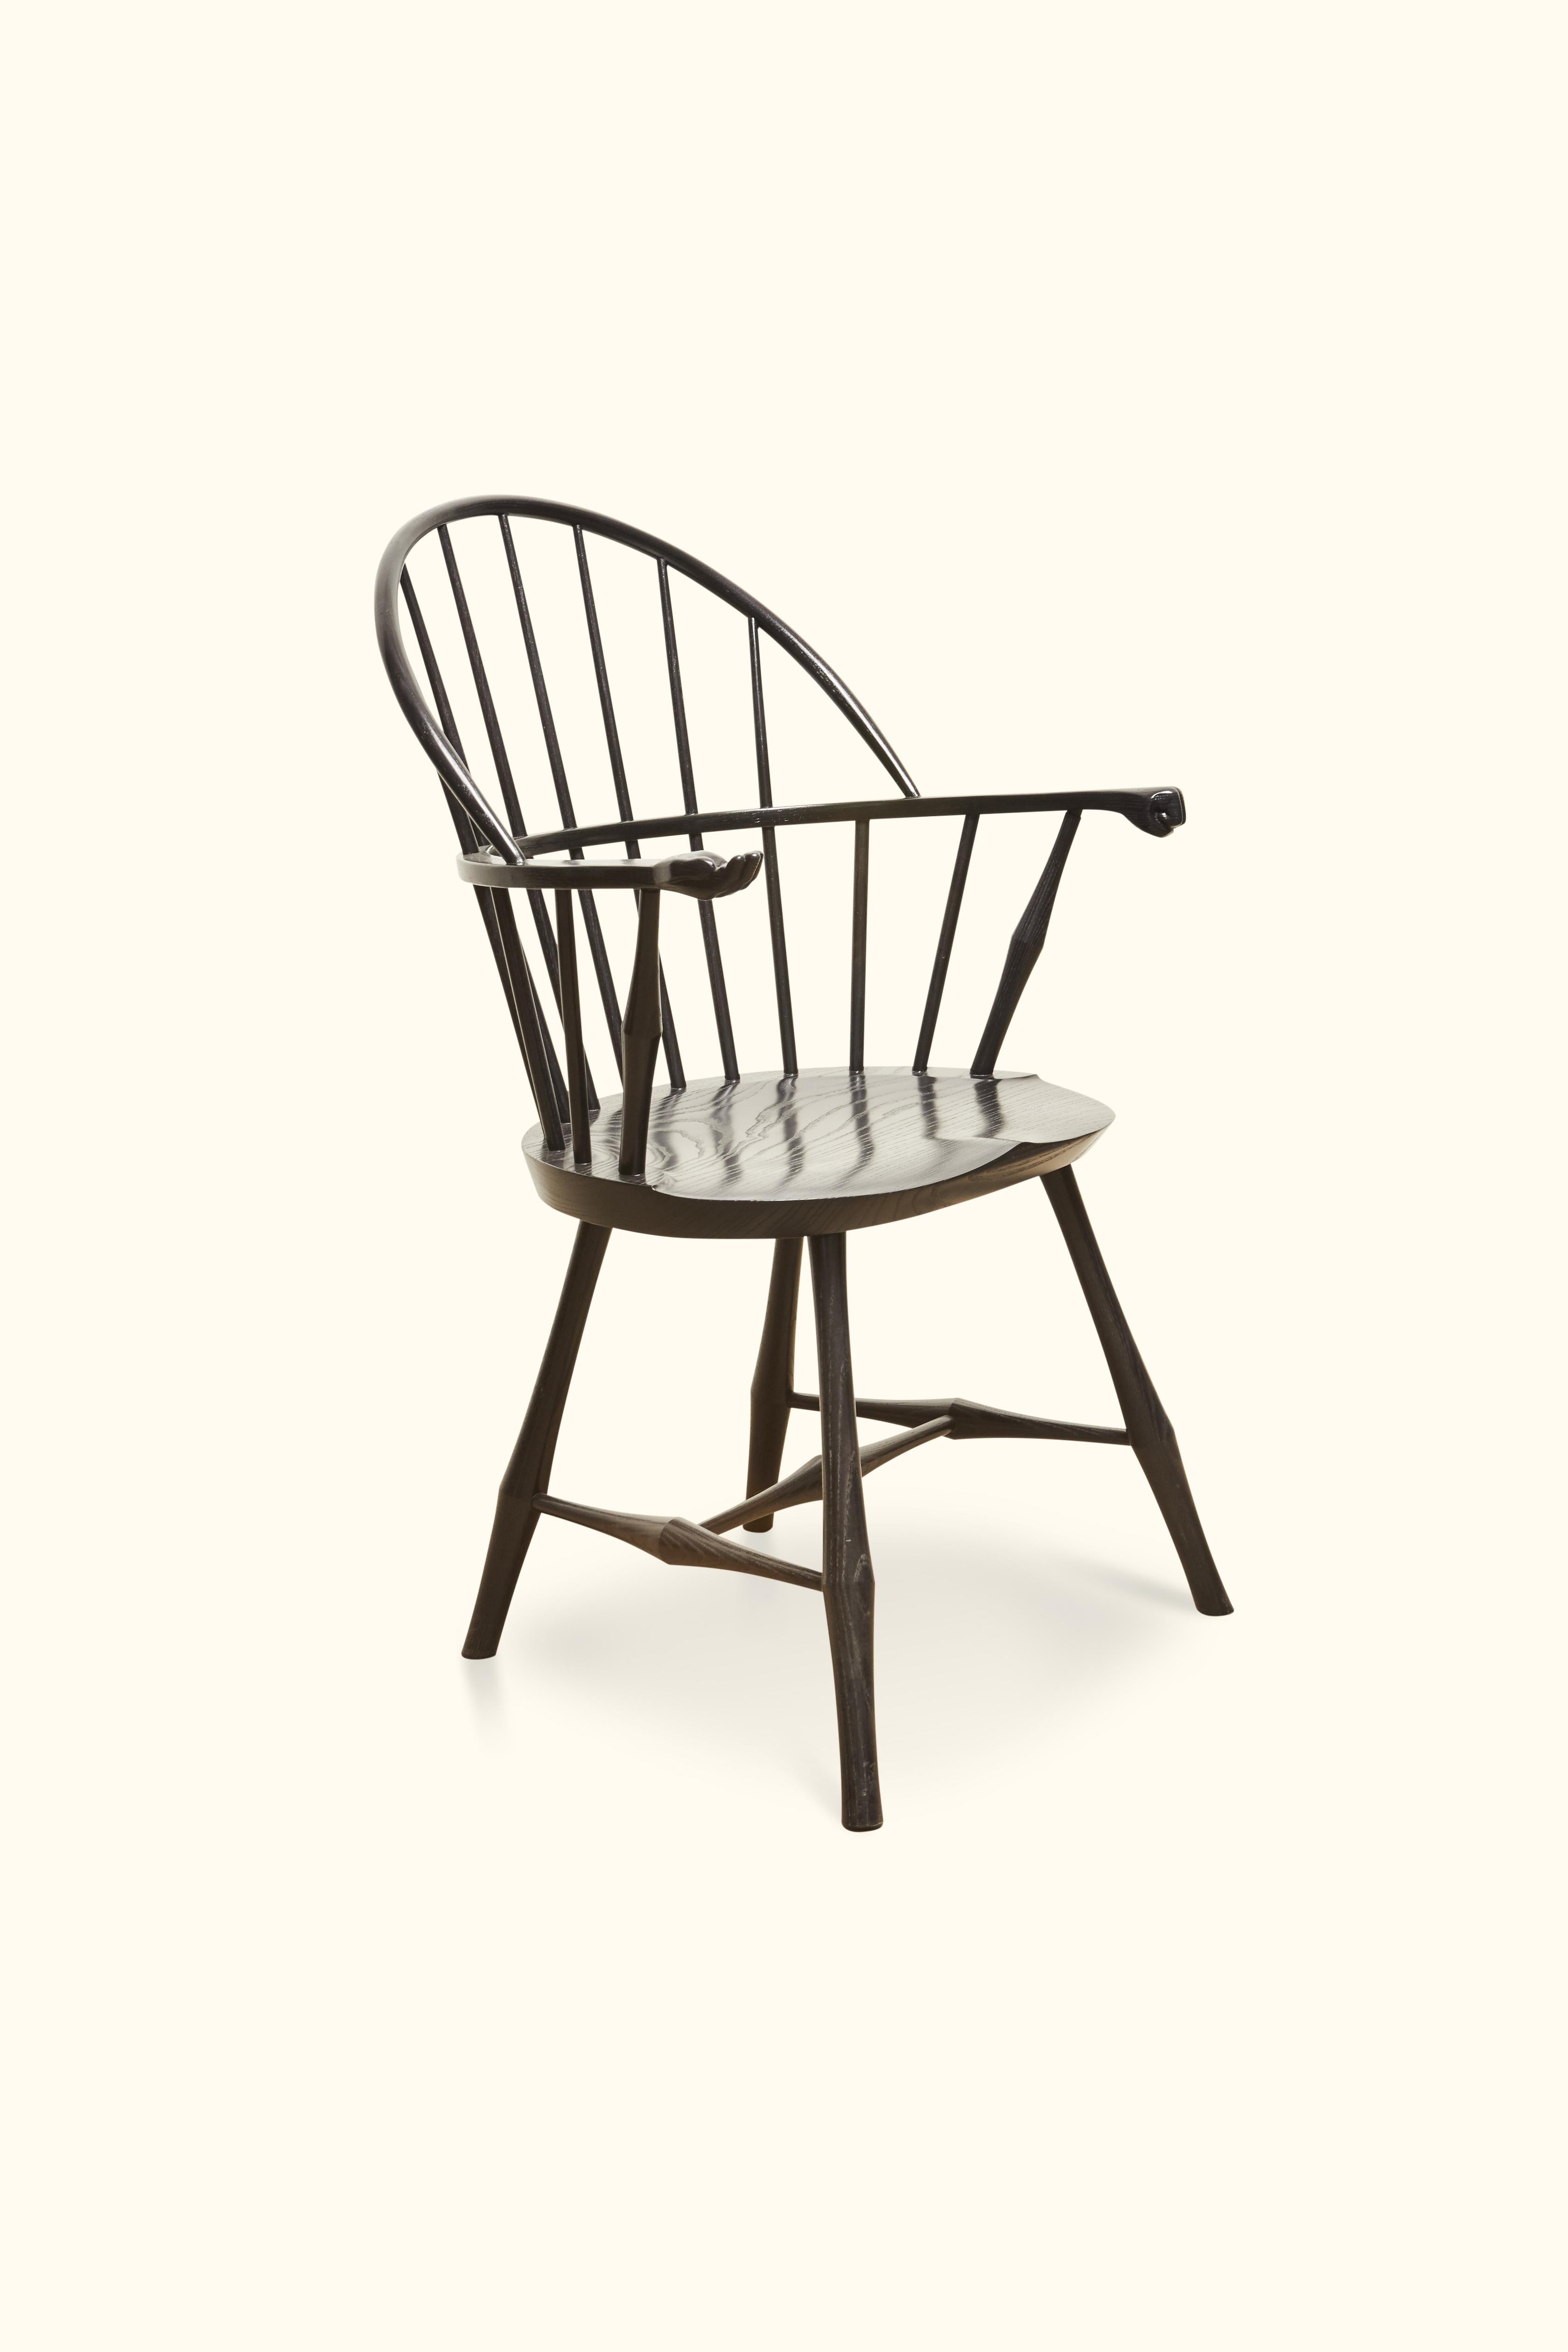 Hand carved fist and palm have been added to this one of a kind windsor chair. The Wayland sack-back armchair has a comfortable hand-shaped saddle seat and supportive back.